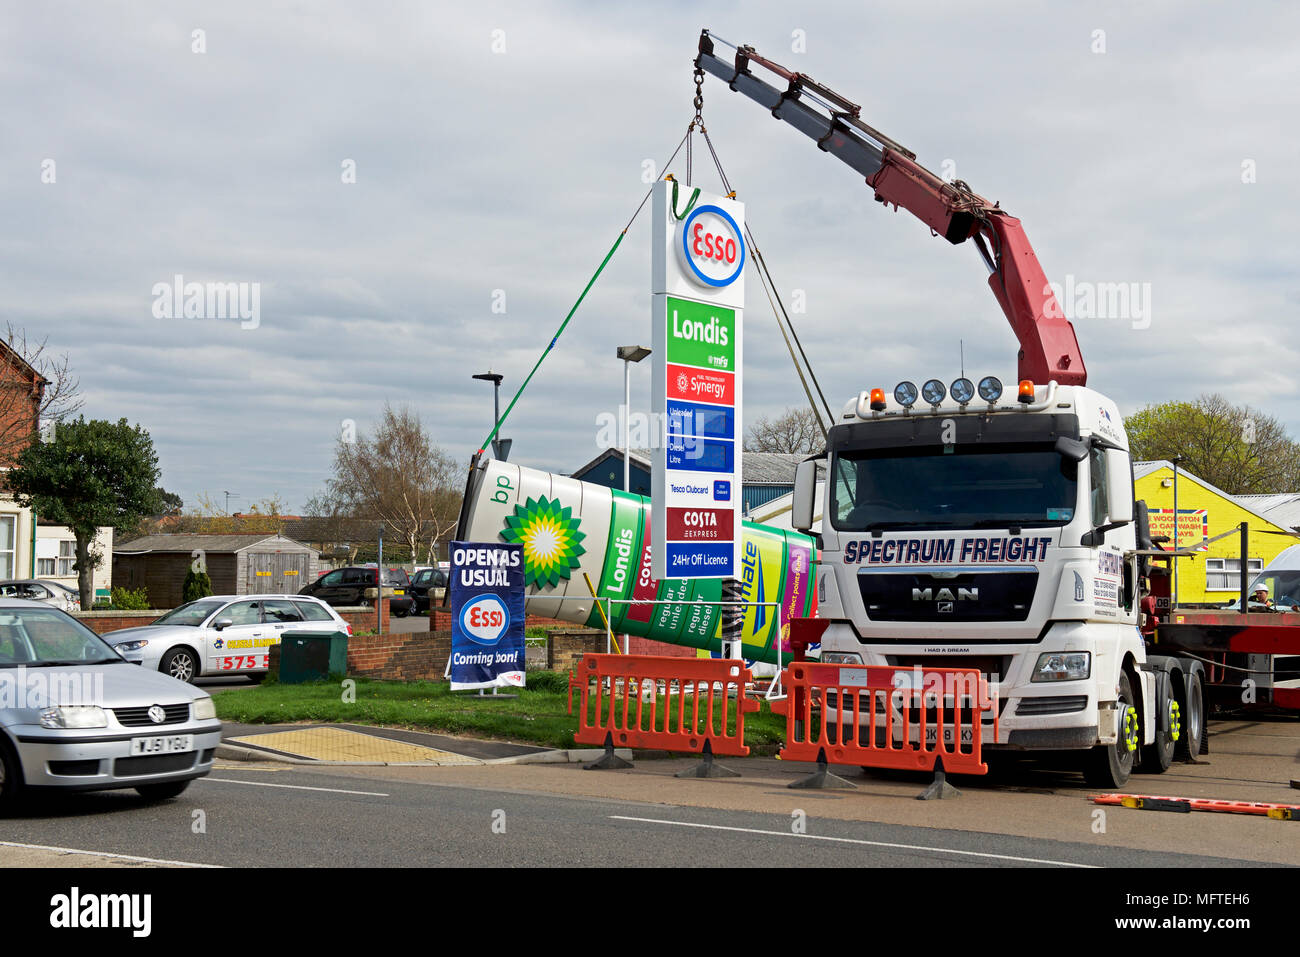 Replacing BP sign with Esso sign at a petrol station in Peterborough, Cambridgeshire, England UK Stock Photo